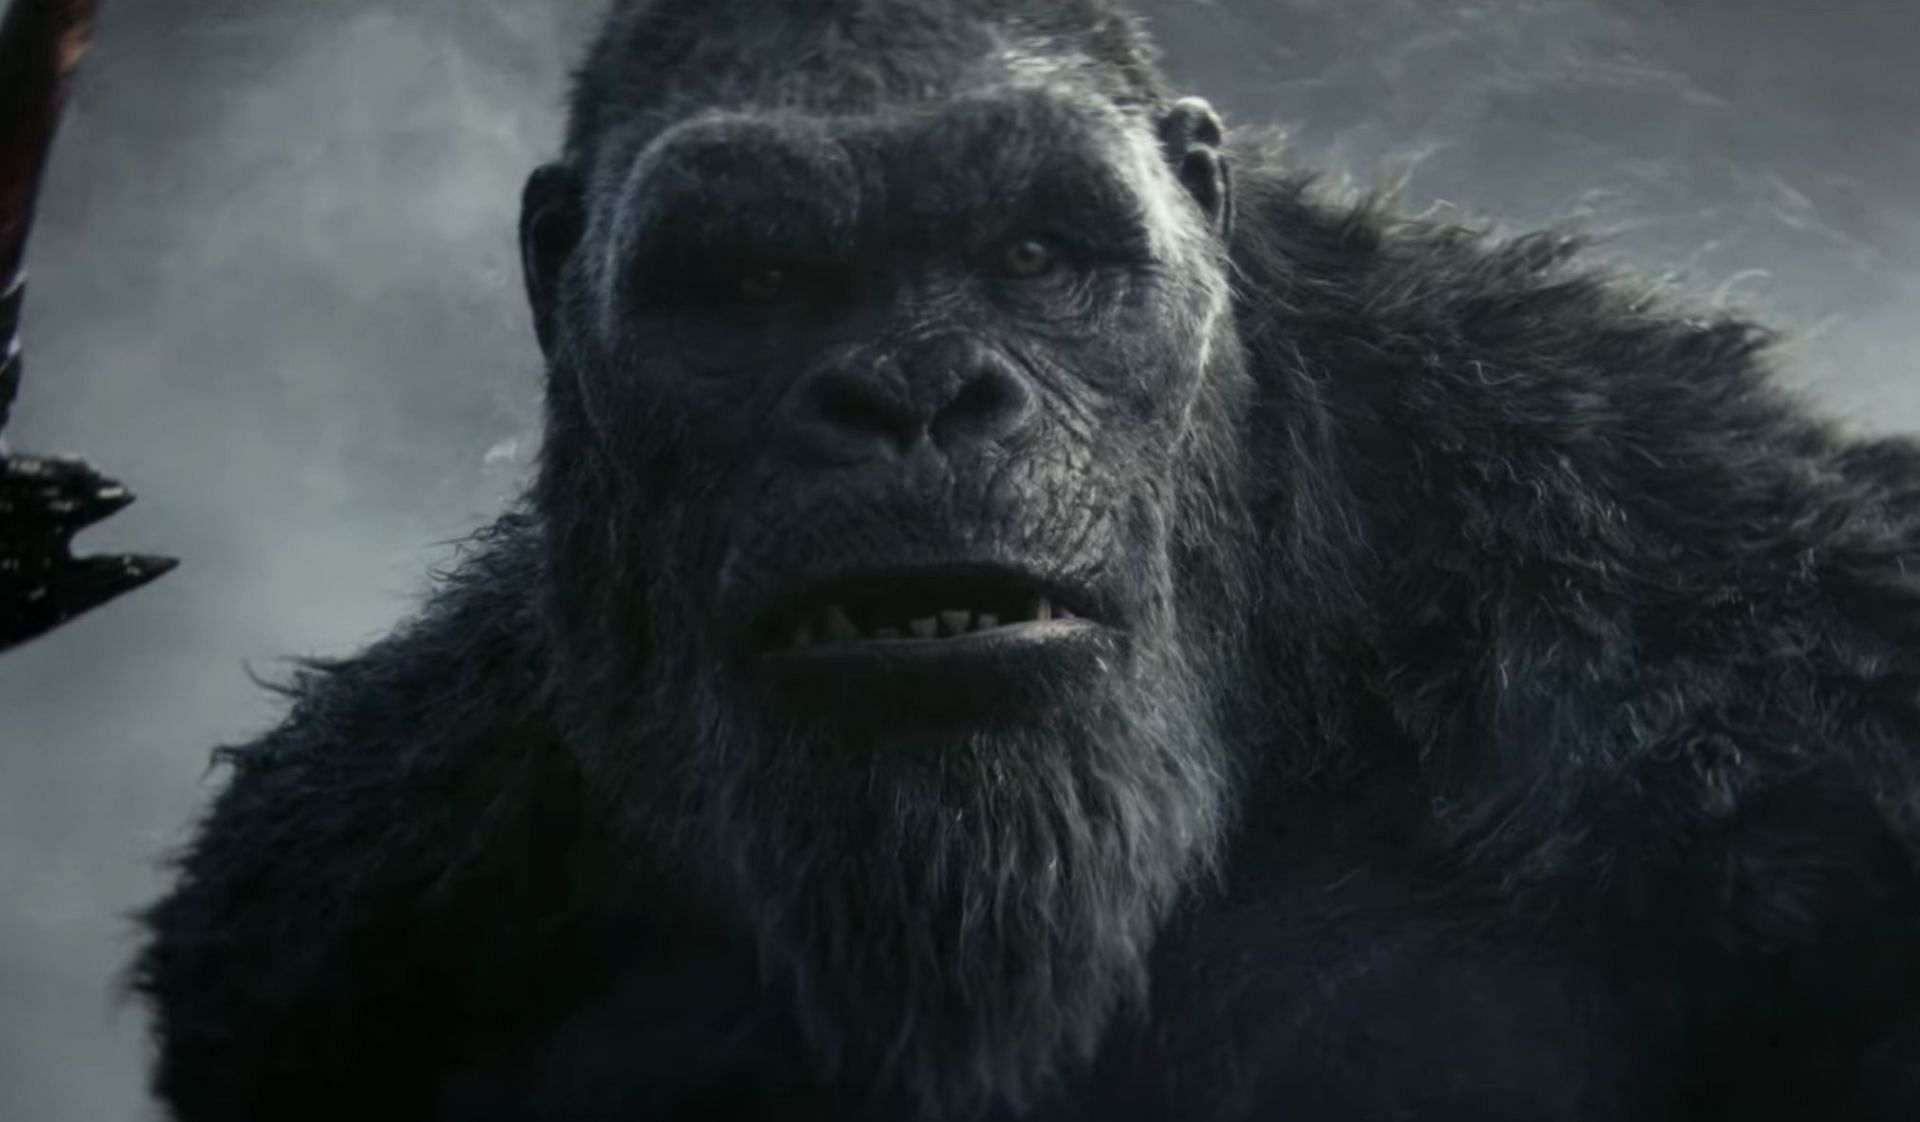 A still of Kong from the trailer of the movie (Image via Warner Bros. Pictures)